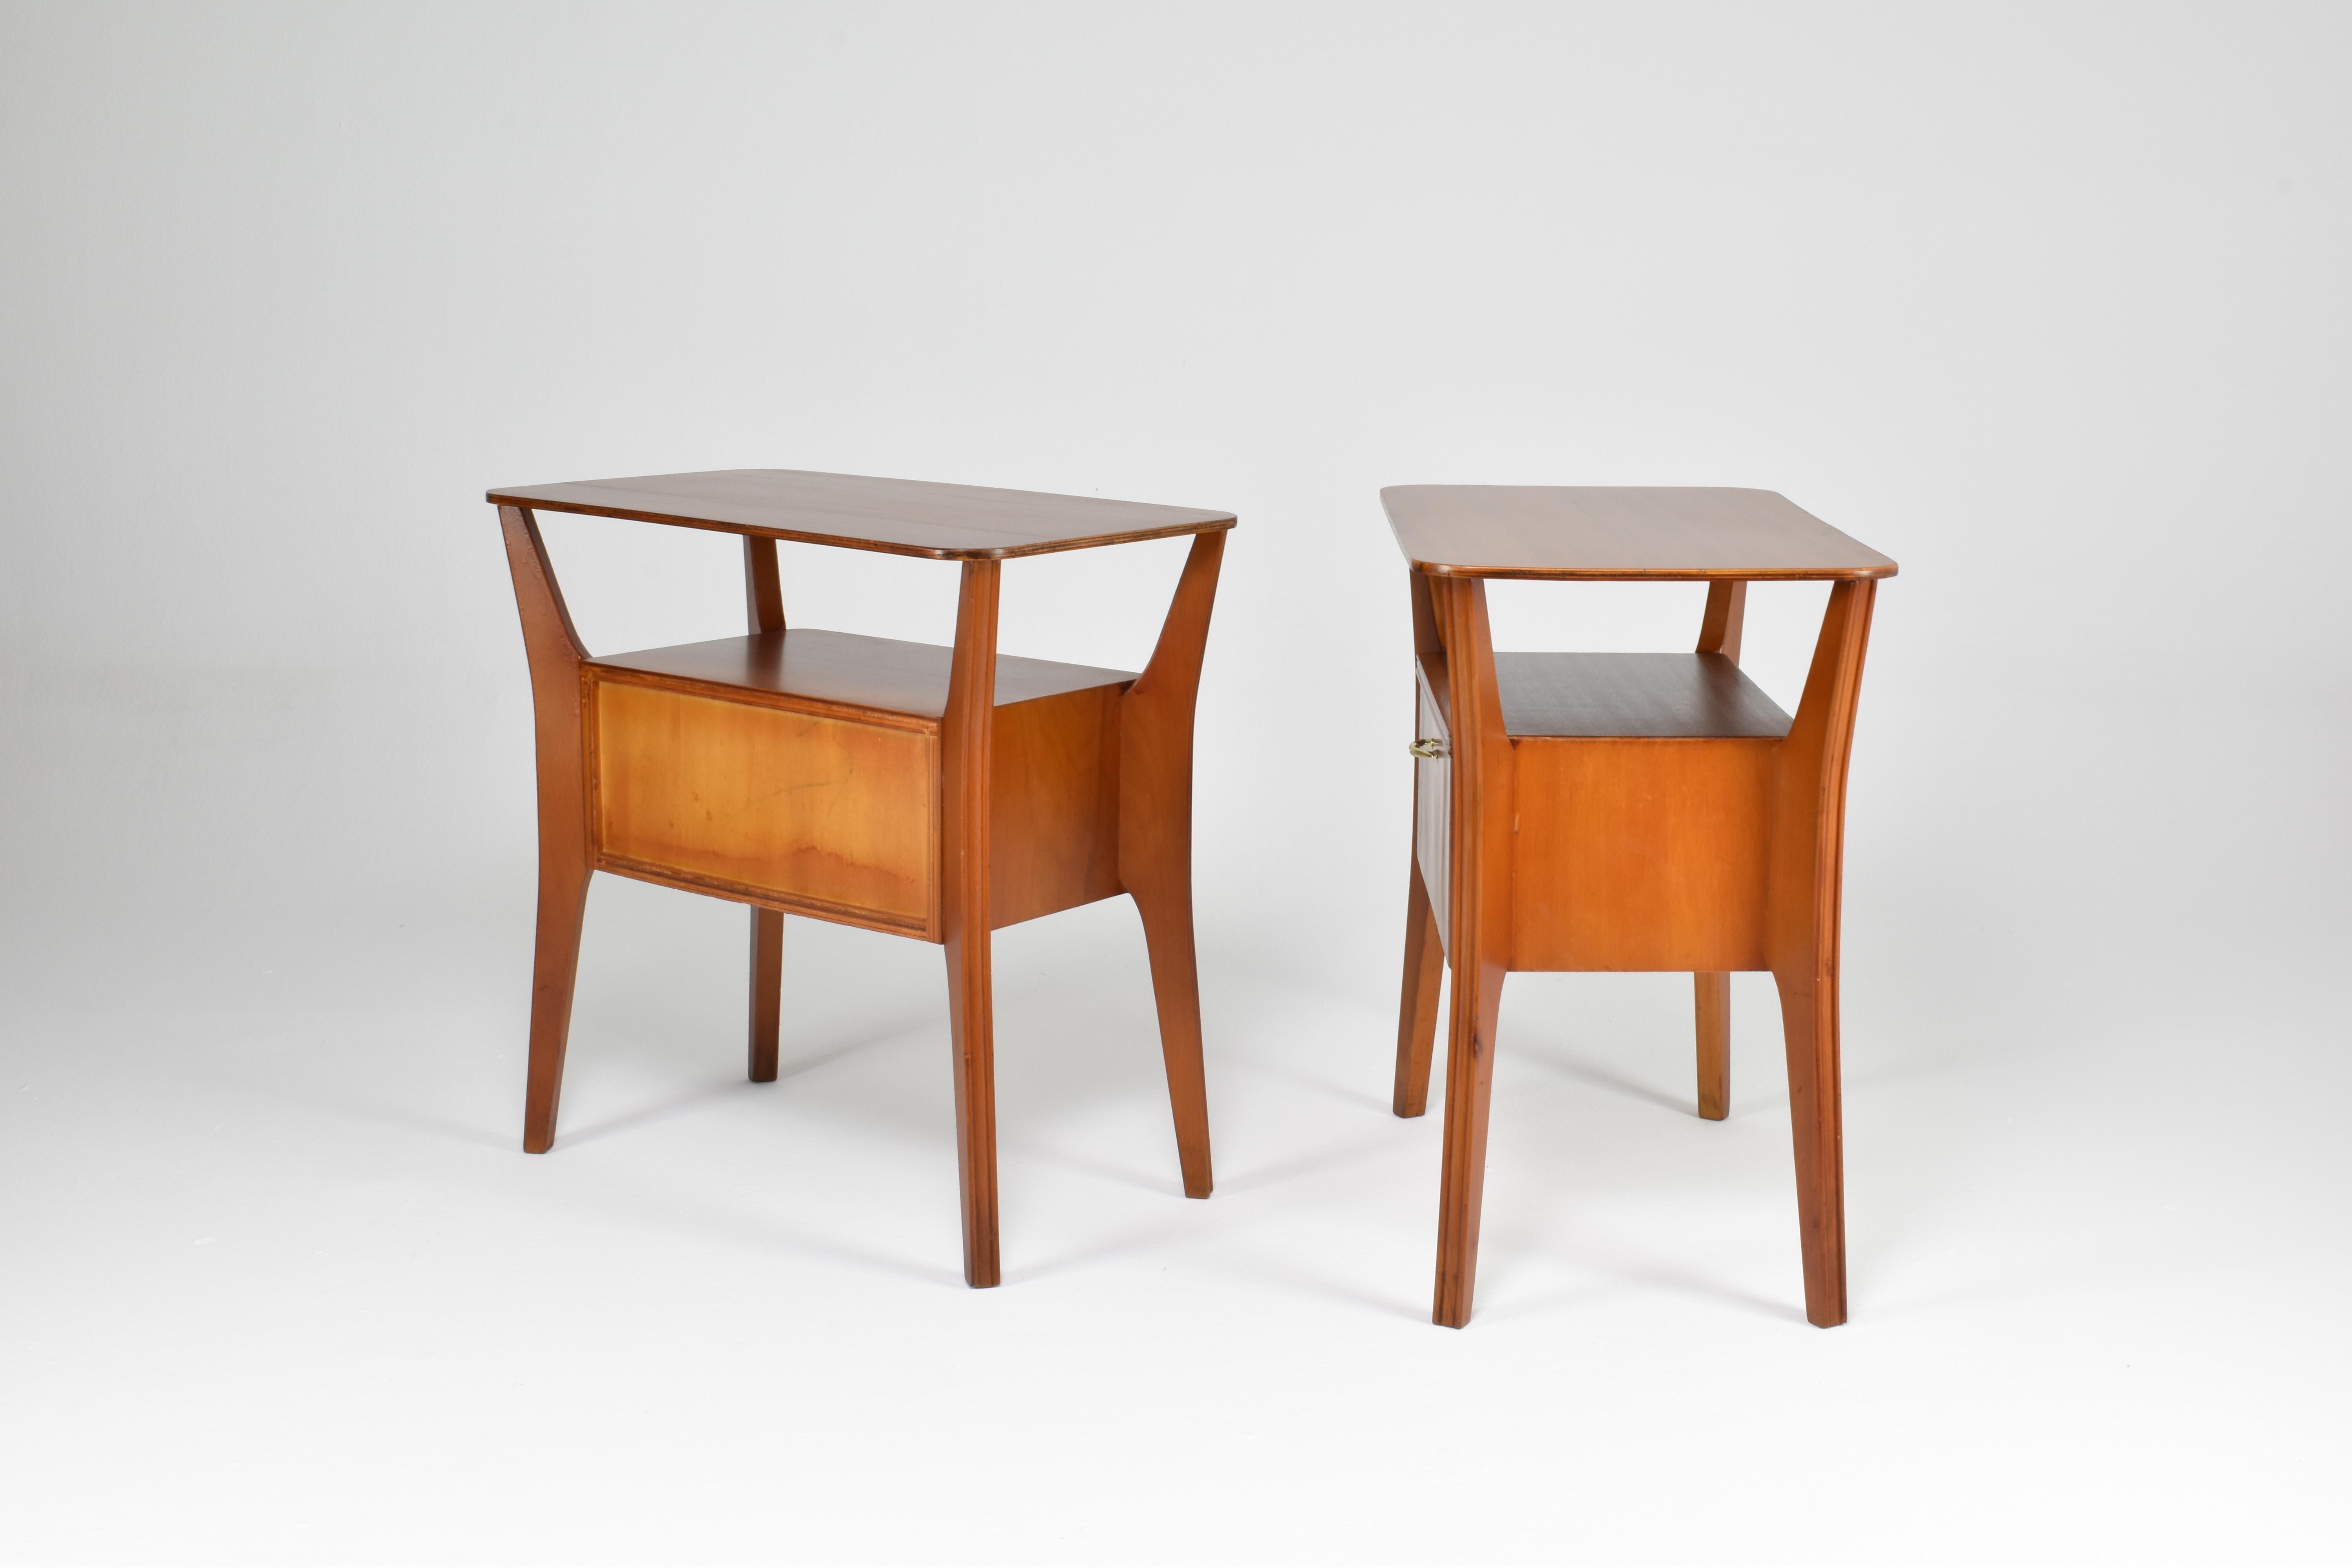 Mid-20th Century Pair of Italian Maple Nightstands Attributed to Gio Ponti for Cantu, 1950s For Sale